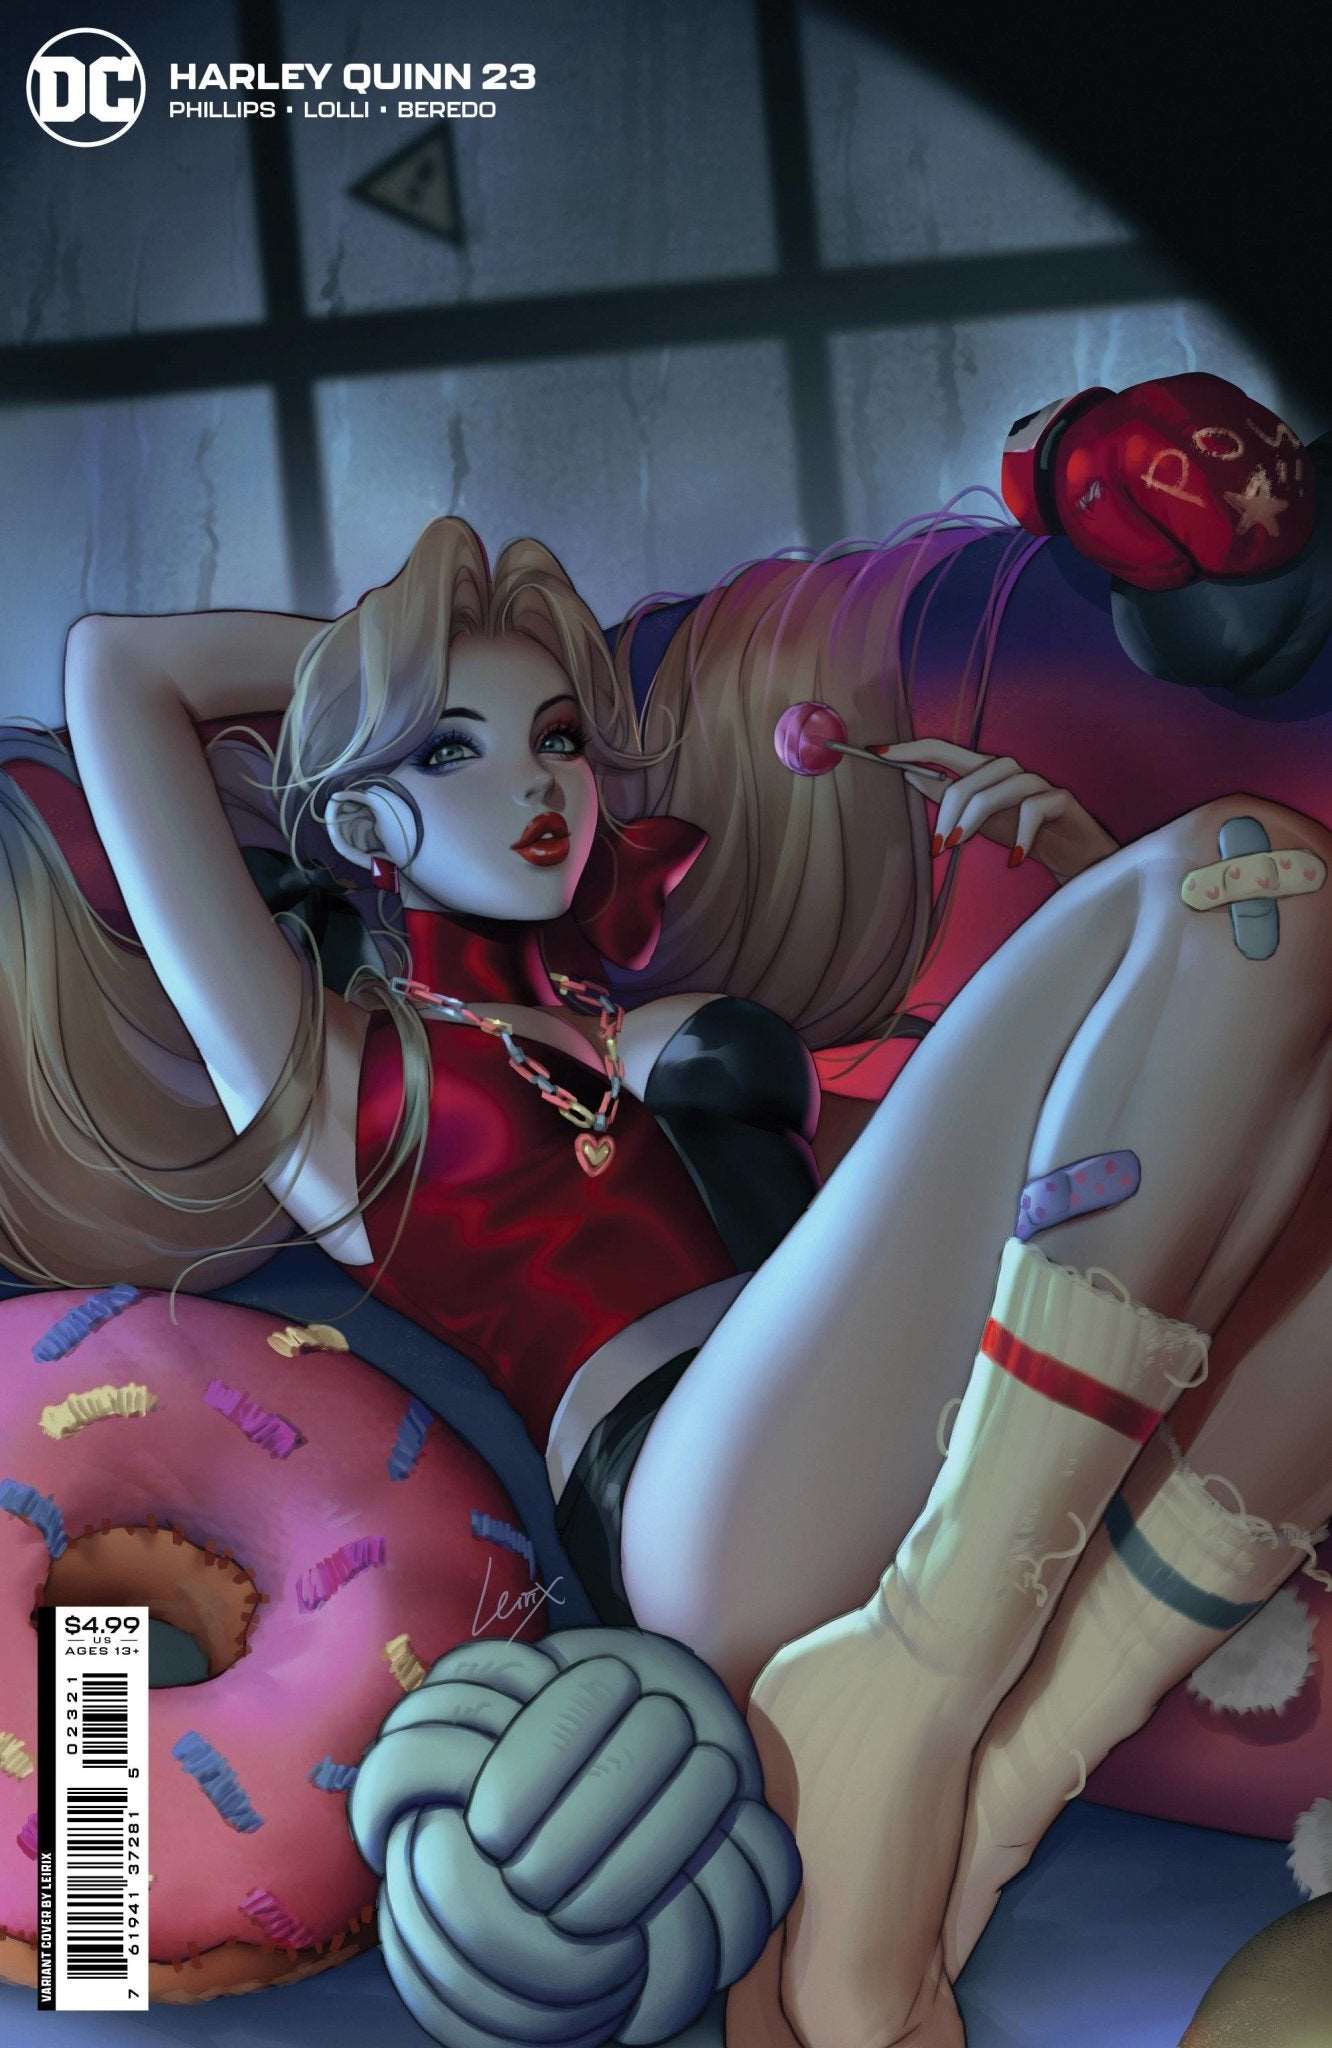 HARLEY QUINN #23 - The Comic Construct